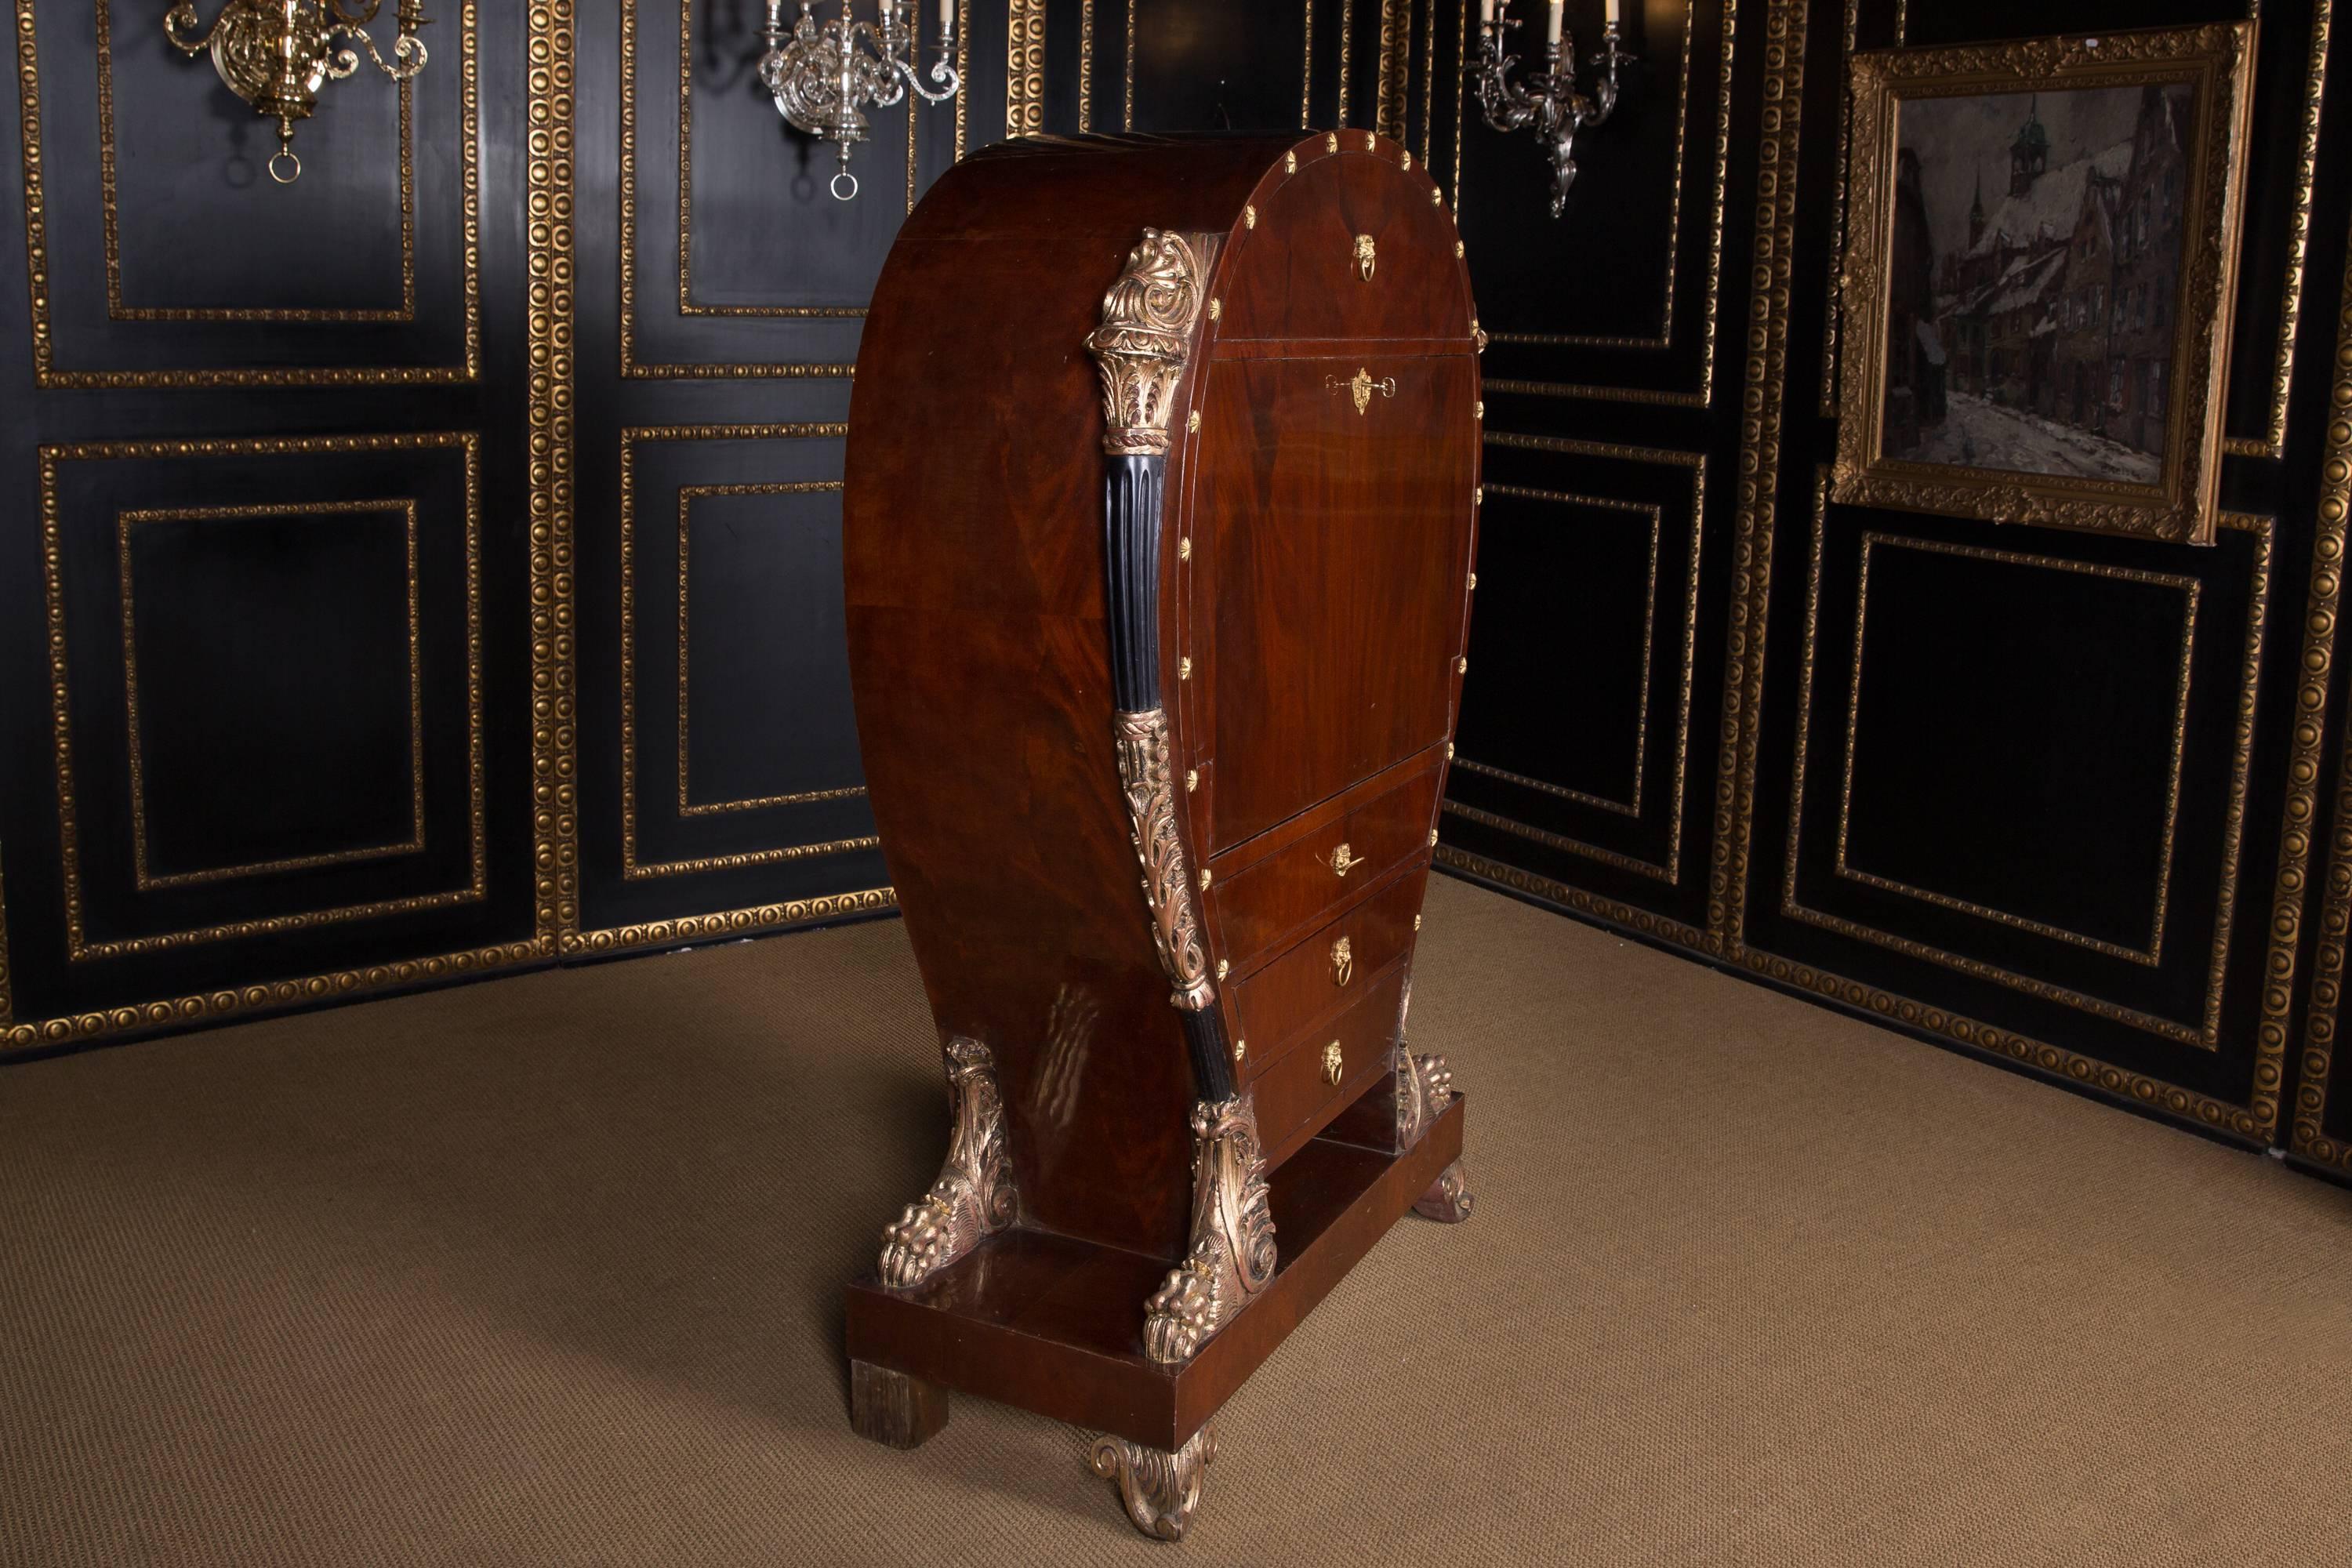 Mahogany on solid conifers. On presentation of the great Viennese furniture master Franz Dettler. Wooden carved filling horns and stars of bronze frame the lyre-shaped furniture body. Plastic lion mascara with gripping rings.

The original can be